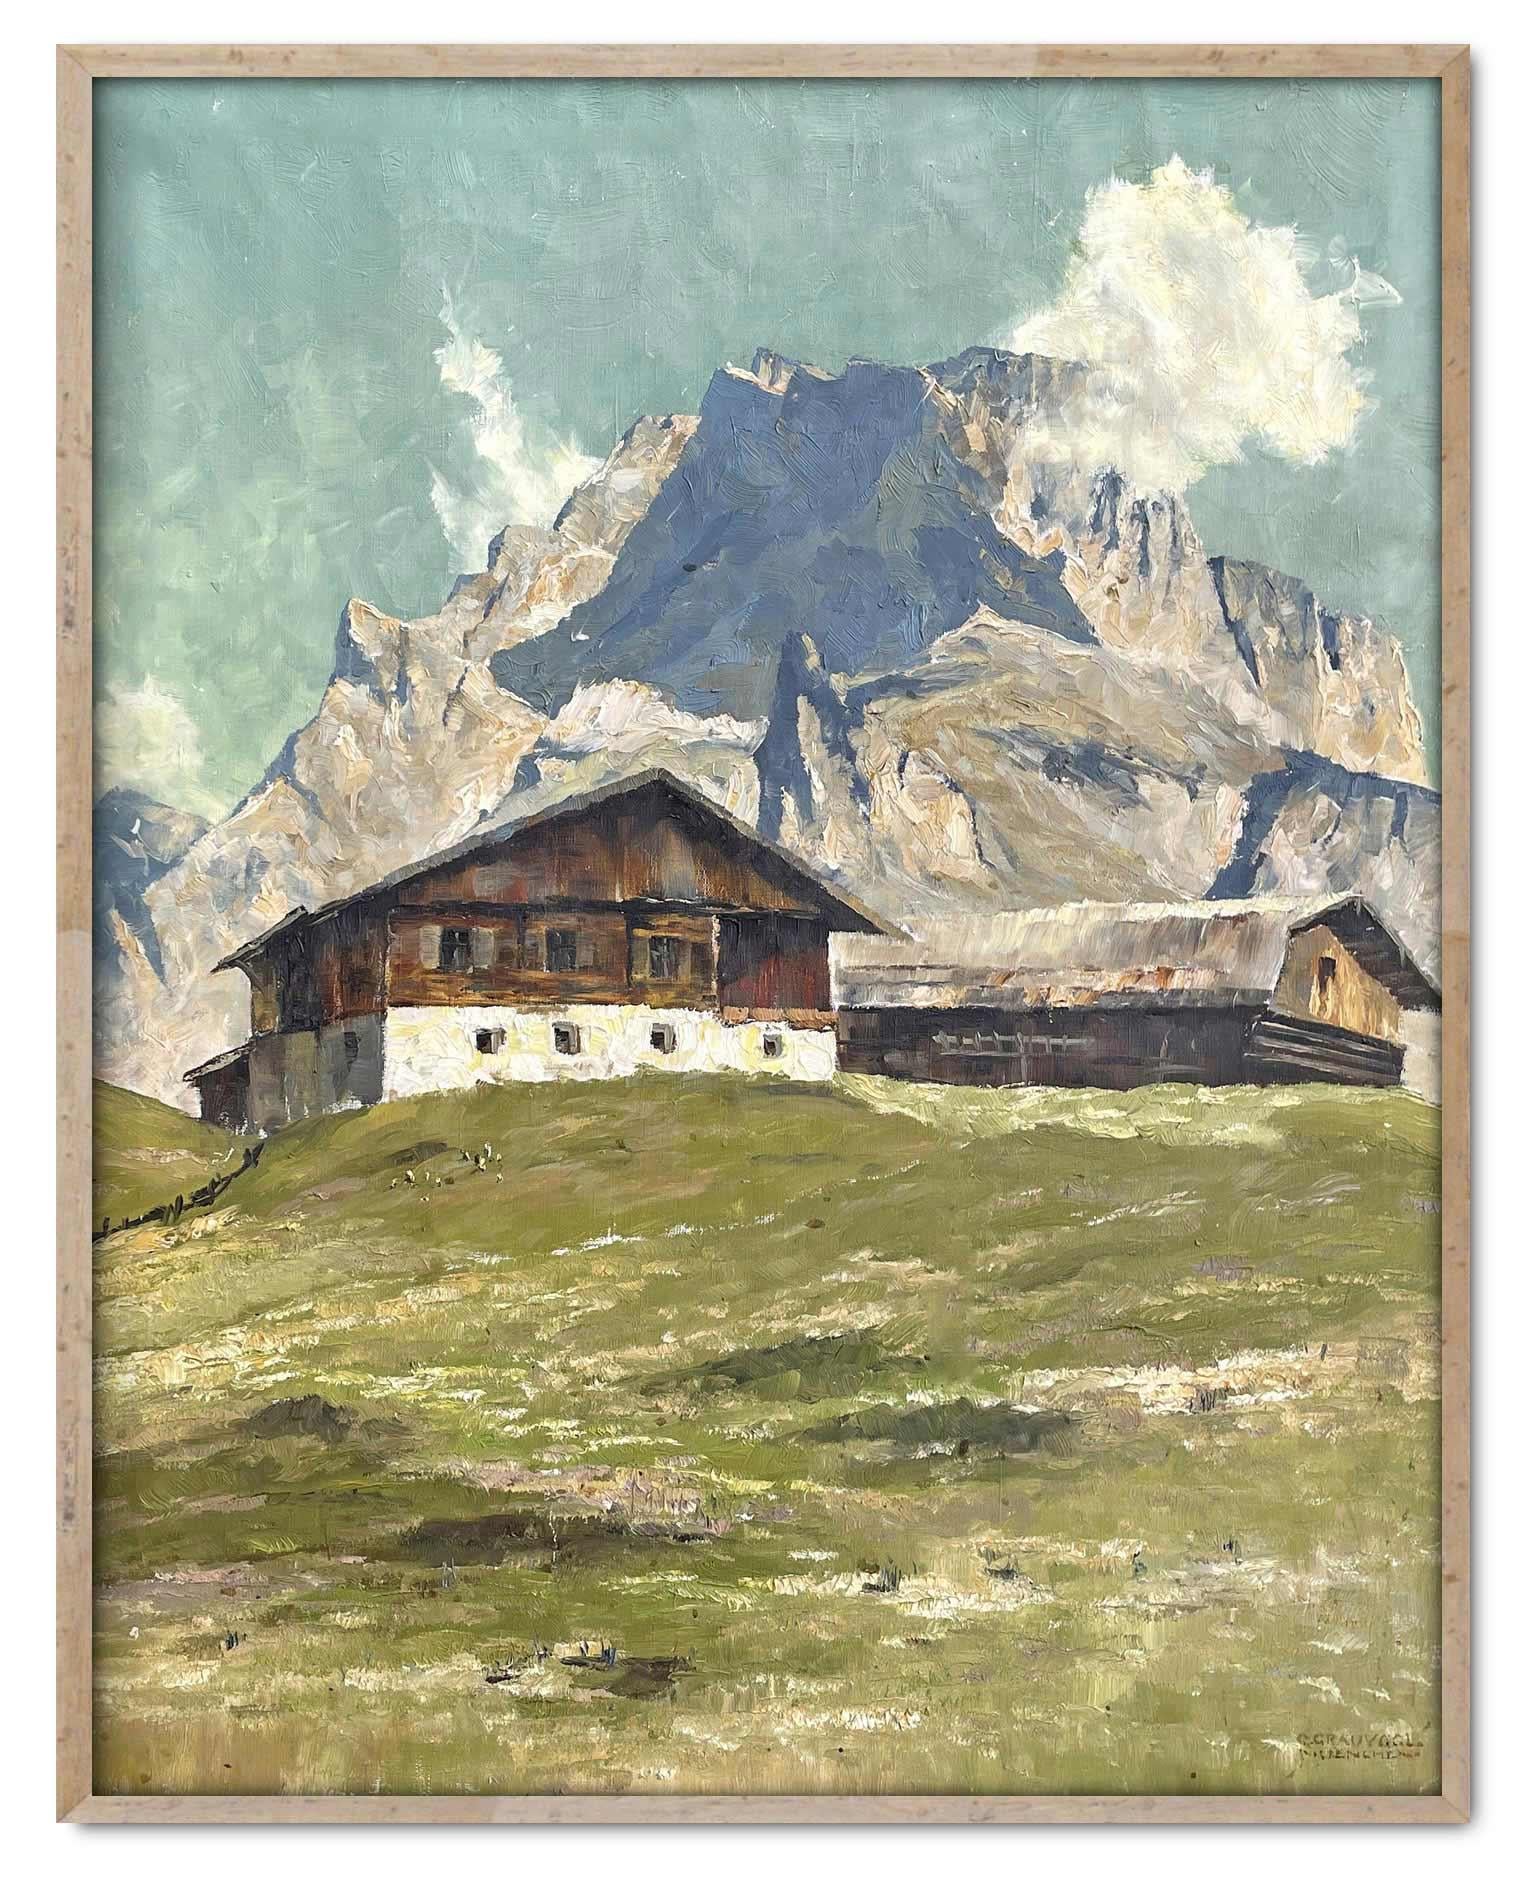 View of Gardena Pass Italian Dolomites Oil on Canvas by Georg Grauvogl  12